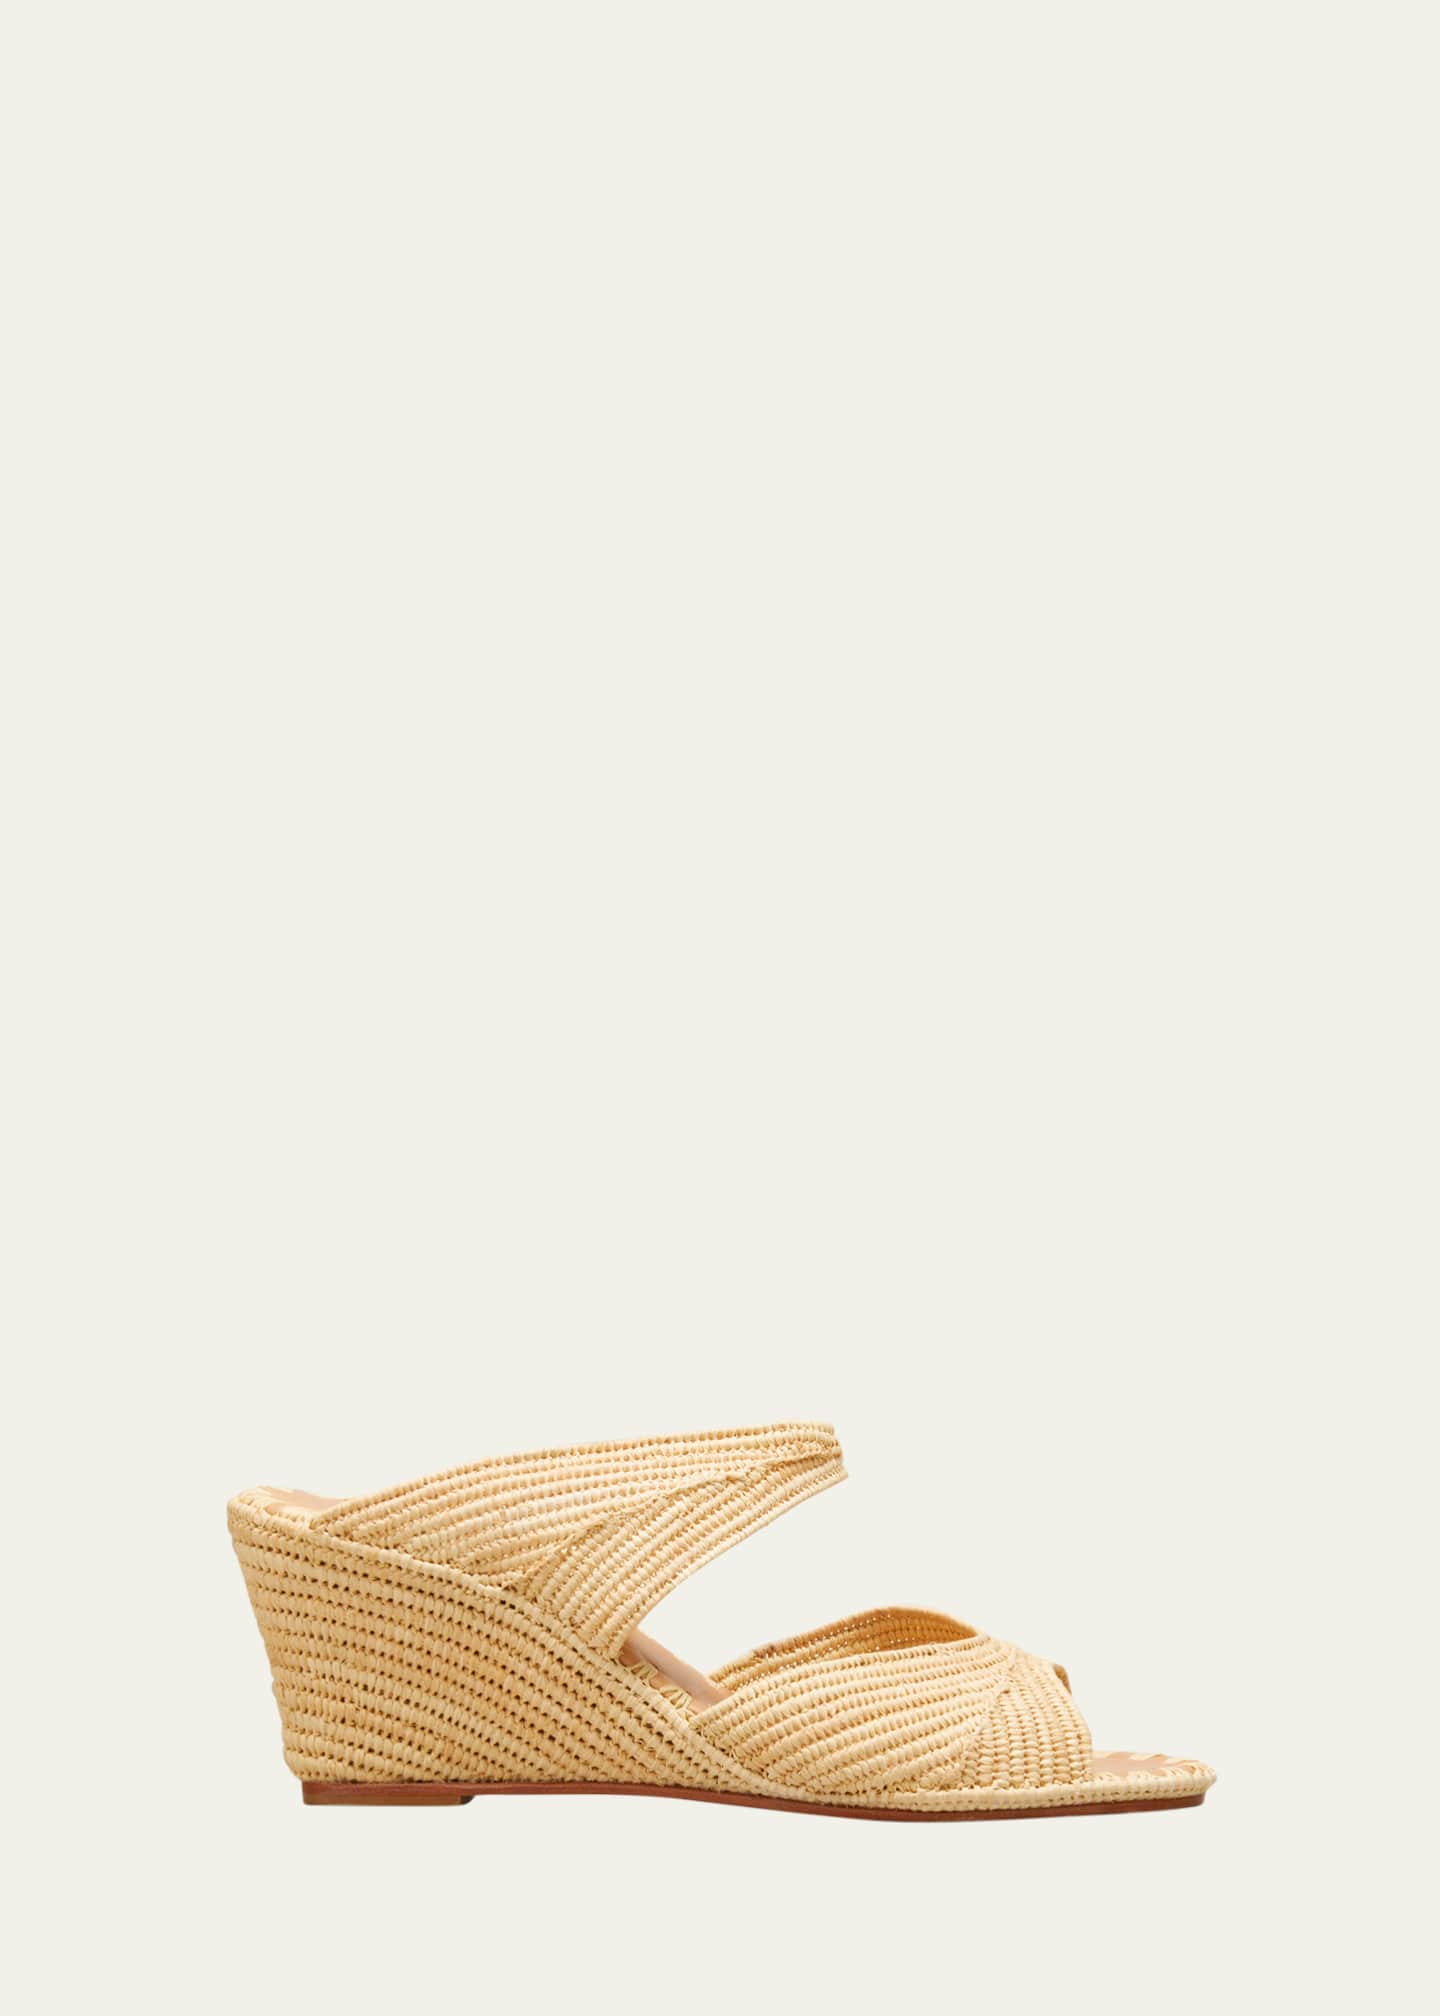 Carrie Forbes Houcine Raffia Wedge Sandals Image 1 of 5